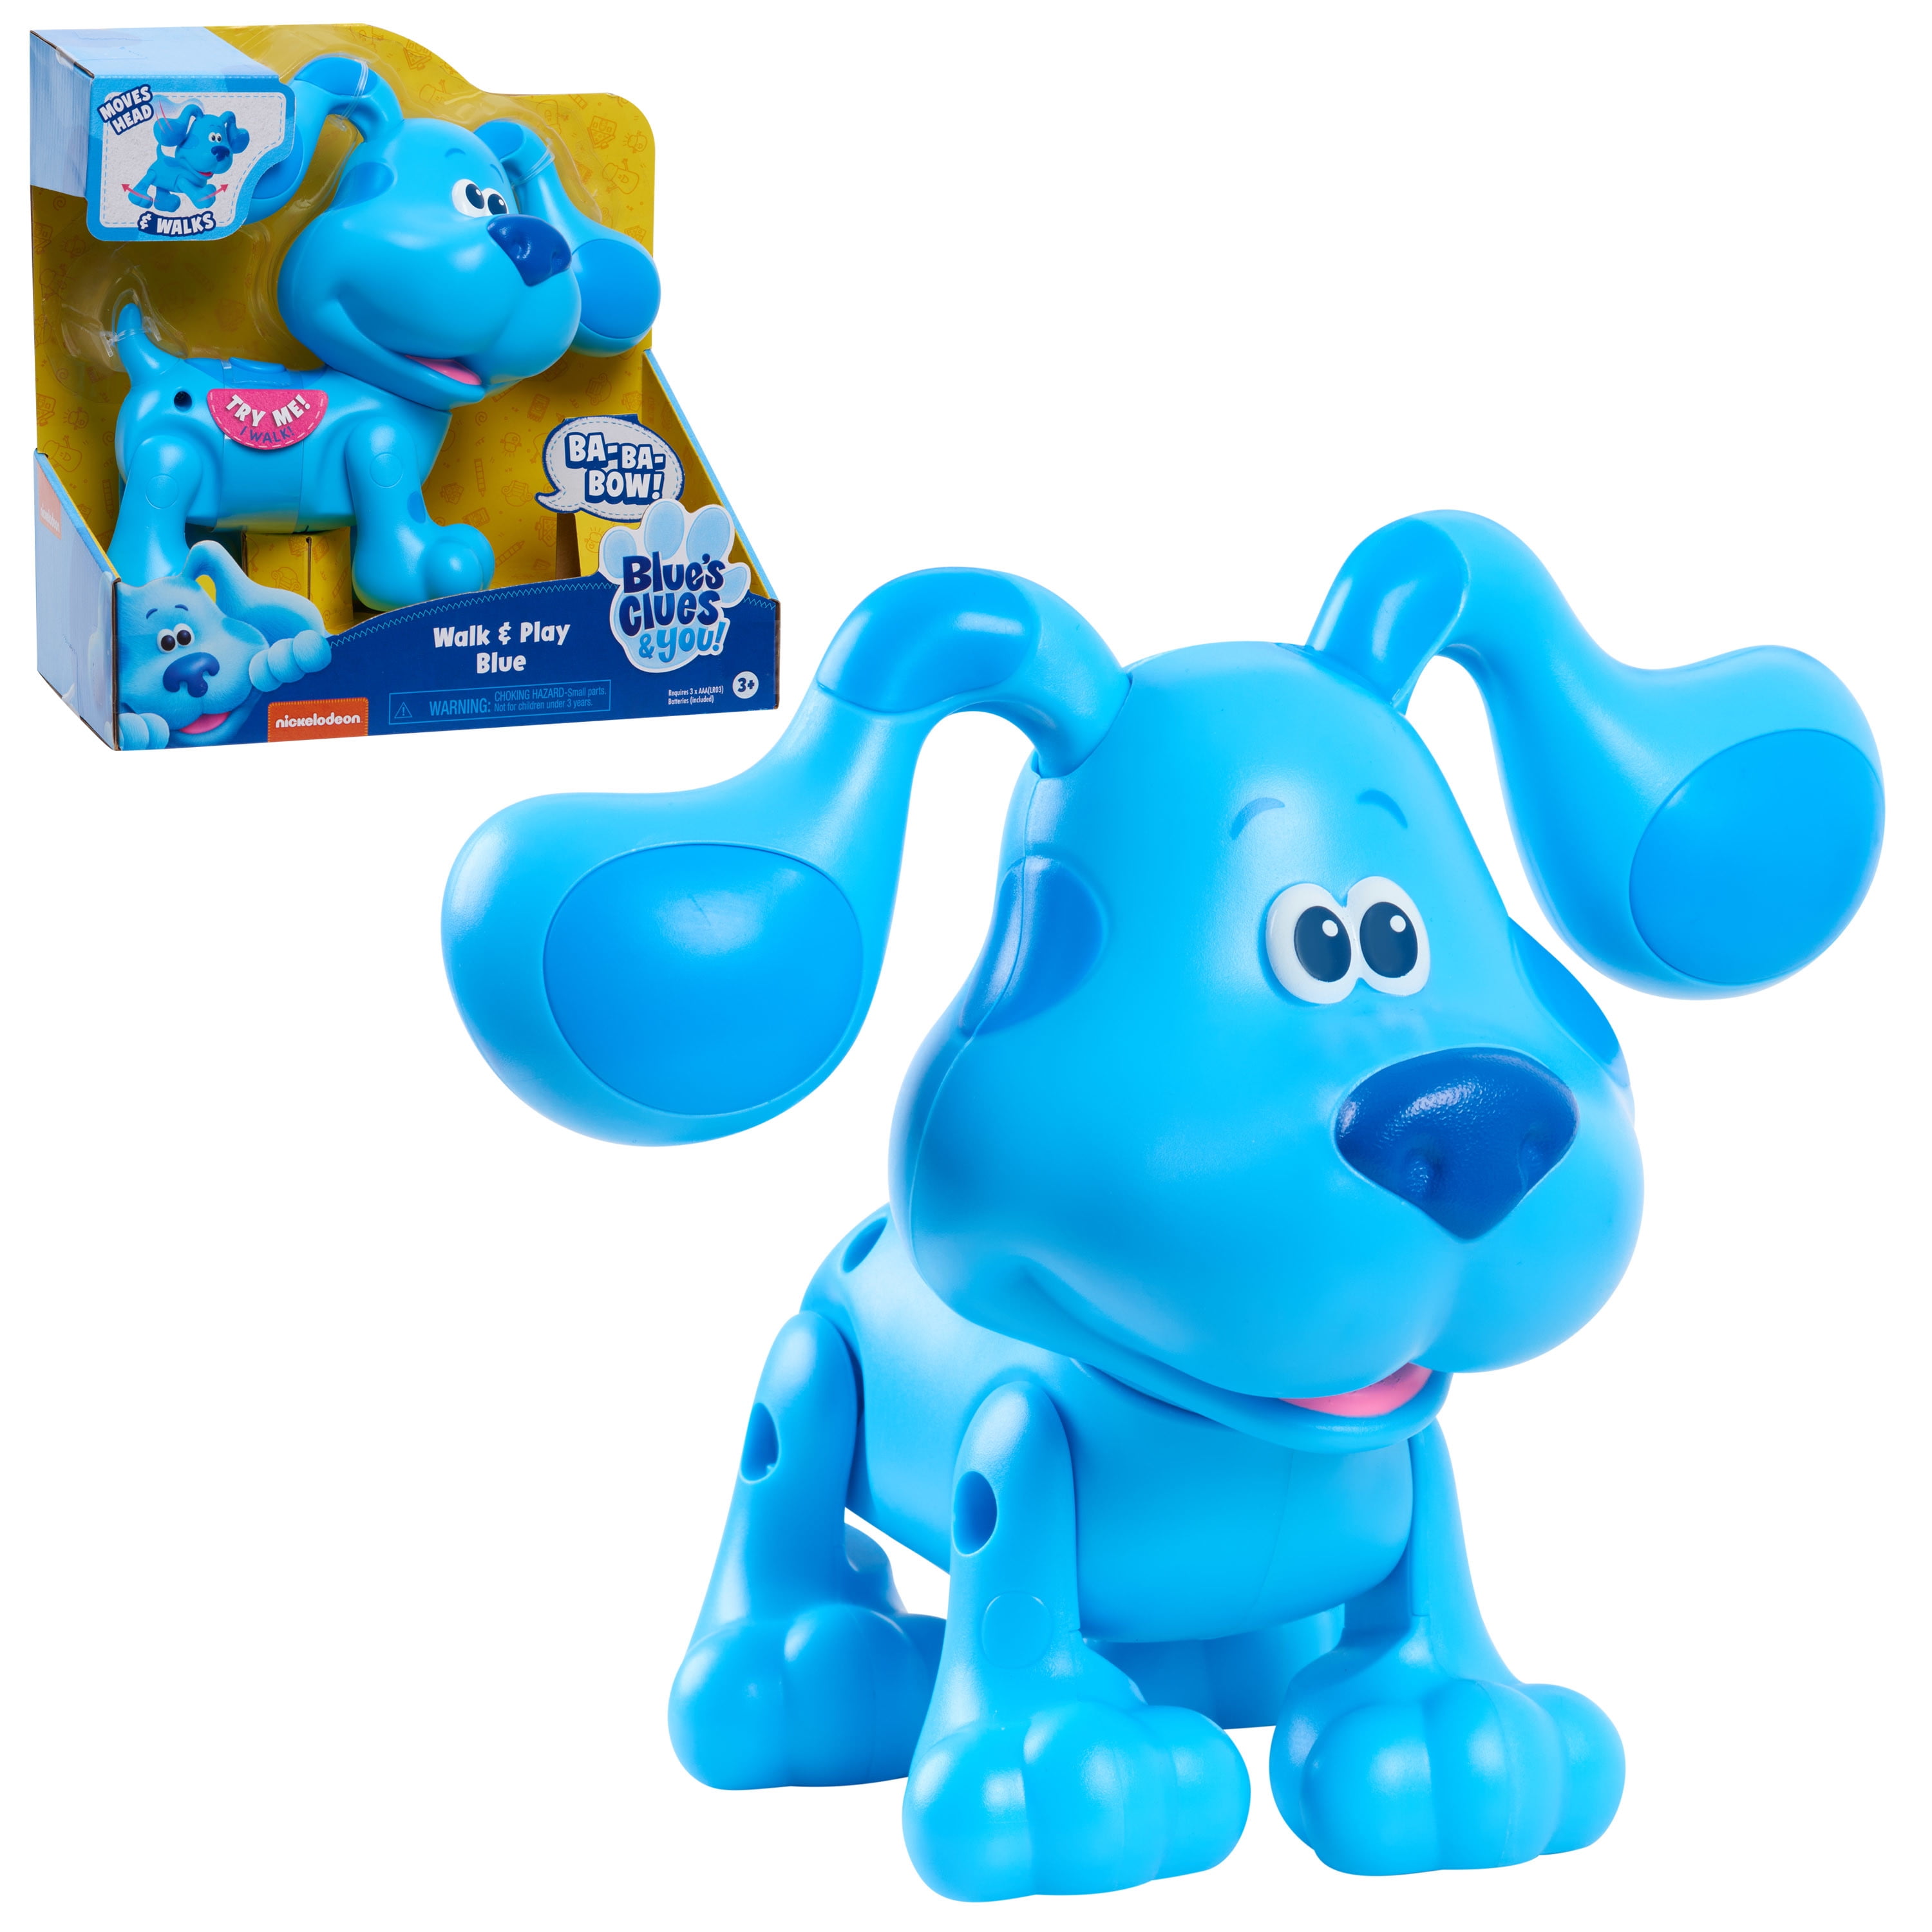 Blue's Clues & You! Walk & Play Blue, Walking and Barking Interactive Pet,  Kids Toys for Ages 3 Up, Gifts and Presents 